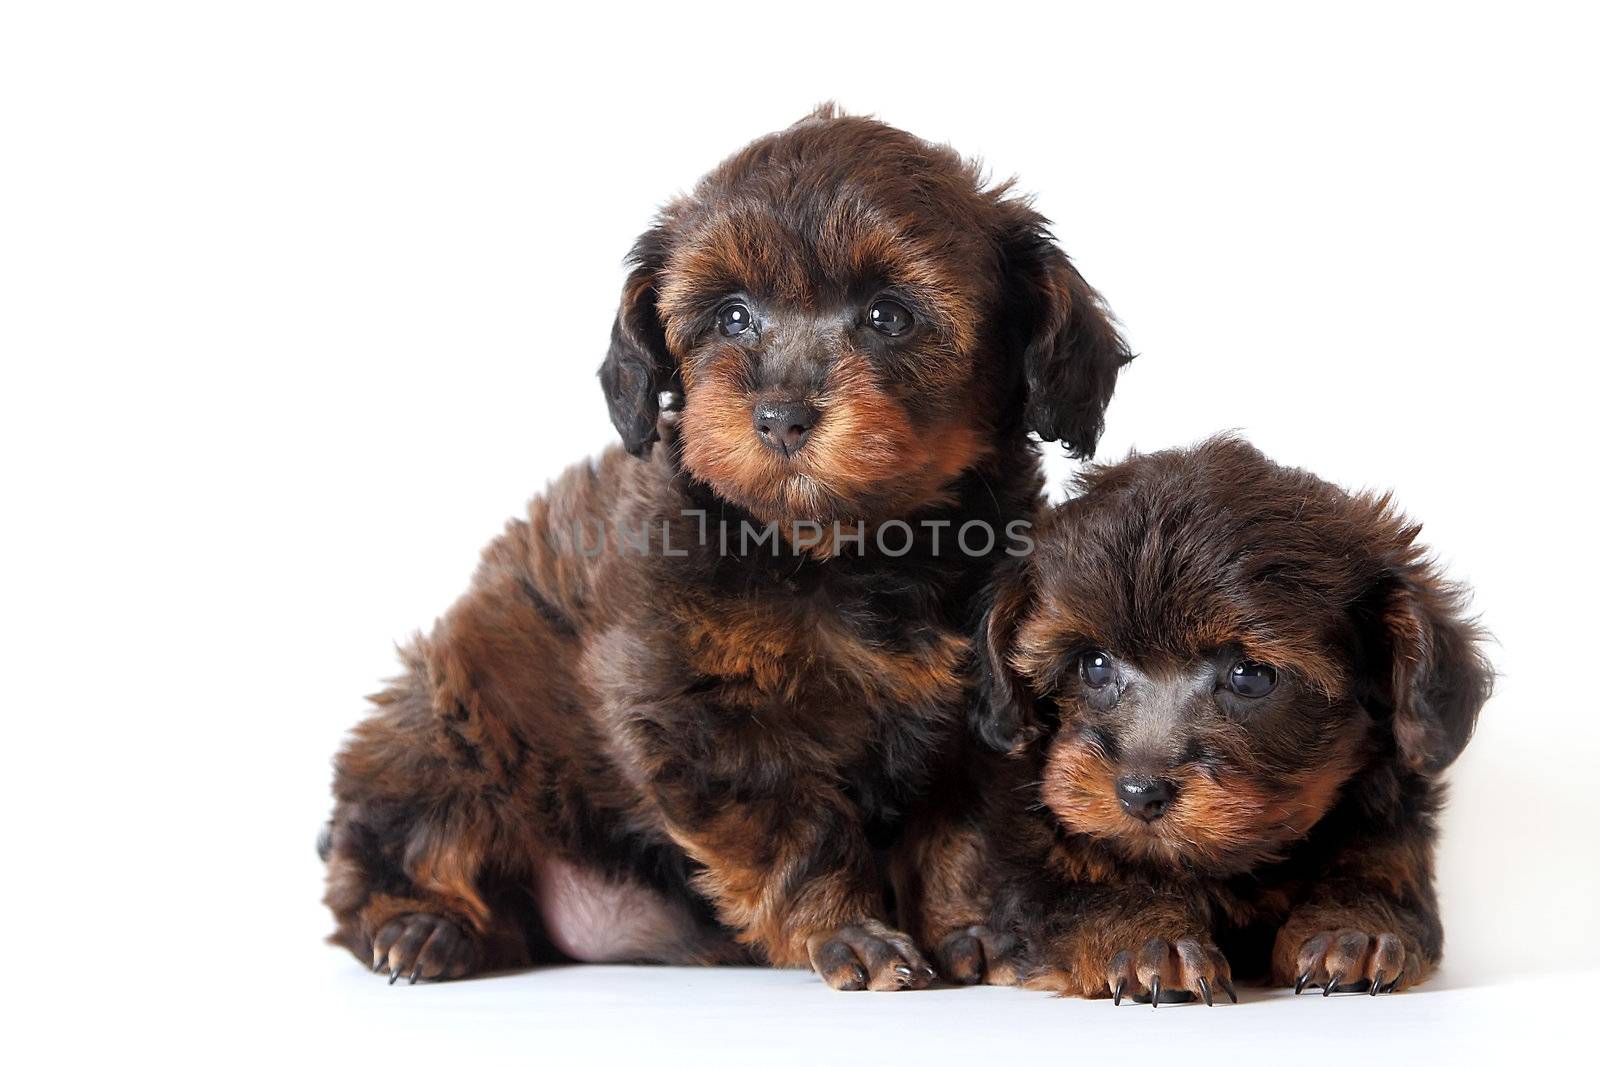 Puppies of the Petersburg orchid on a white background